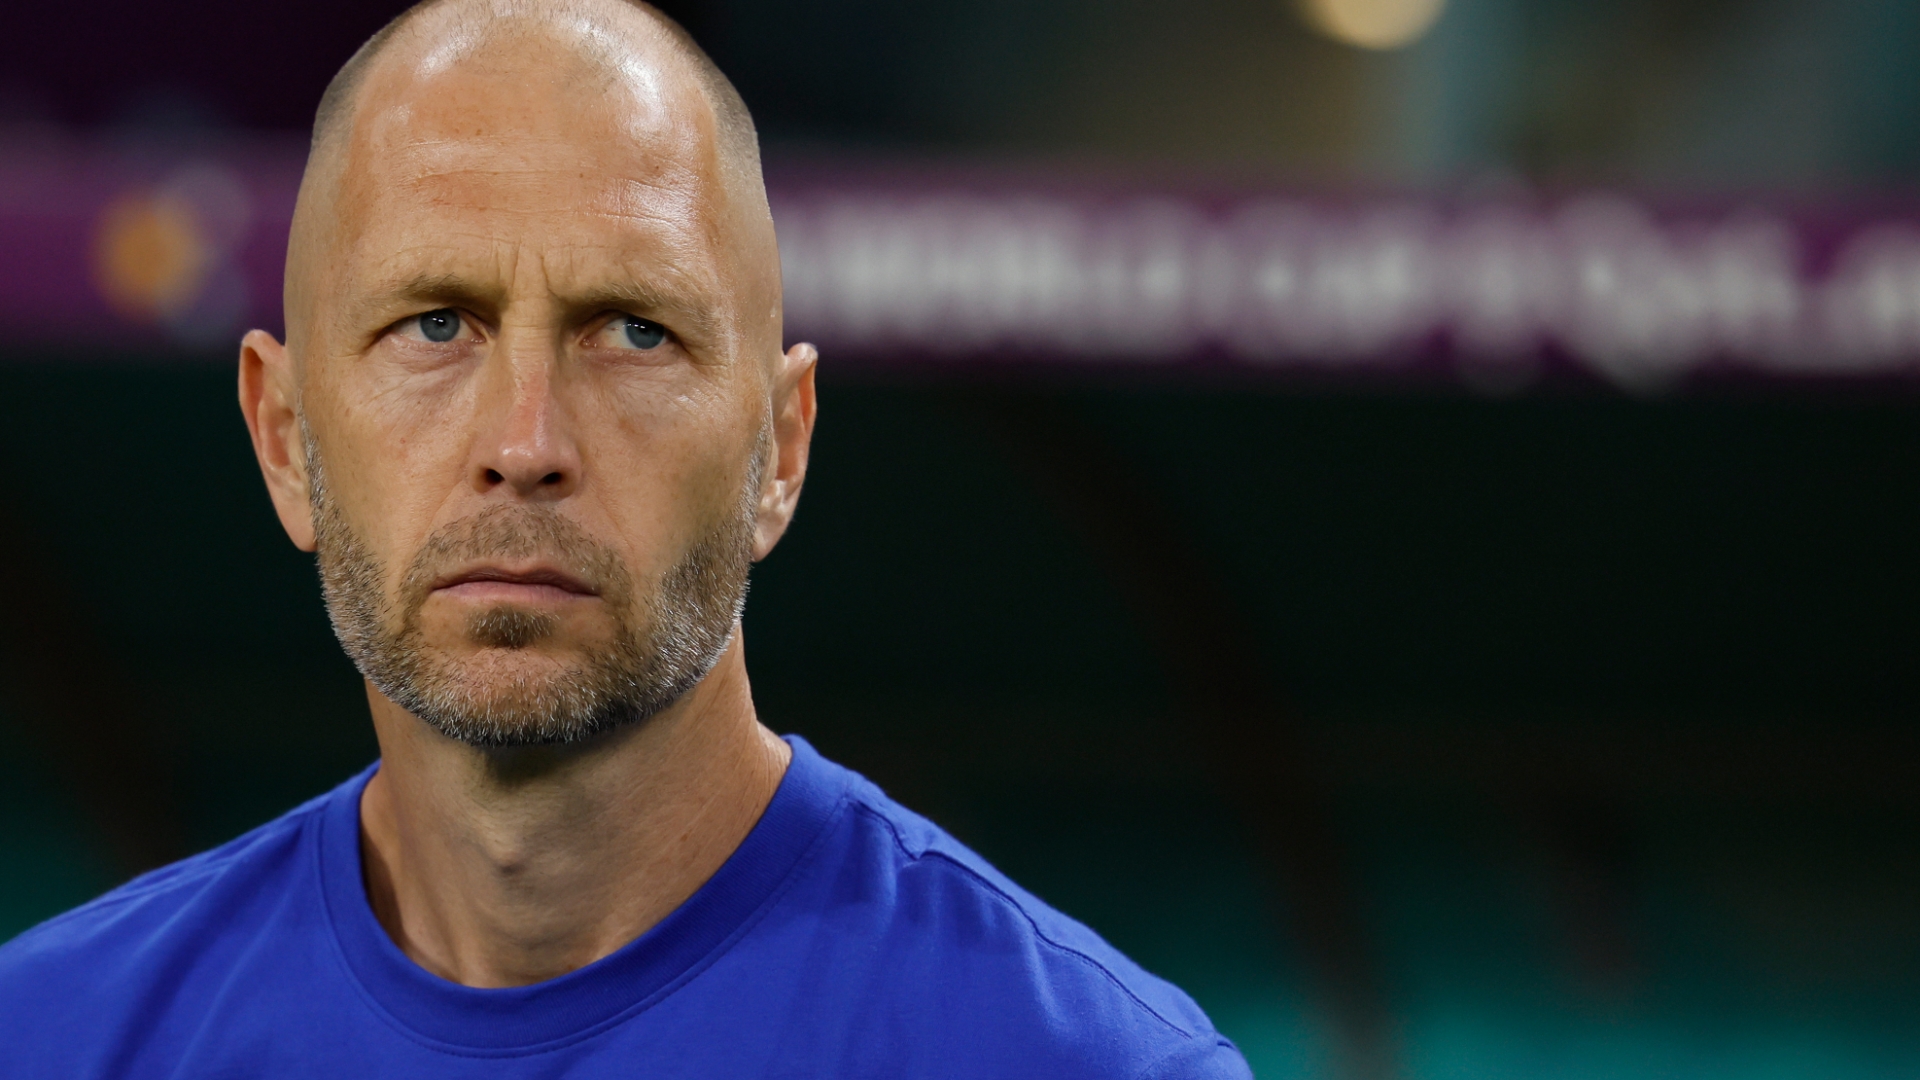 What happens next for Berhalter, Reyna and U.S